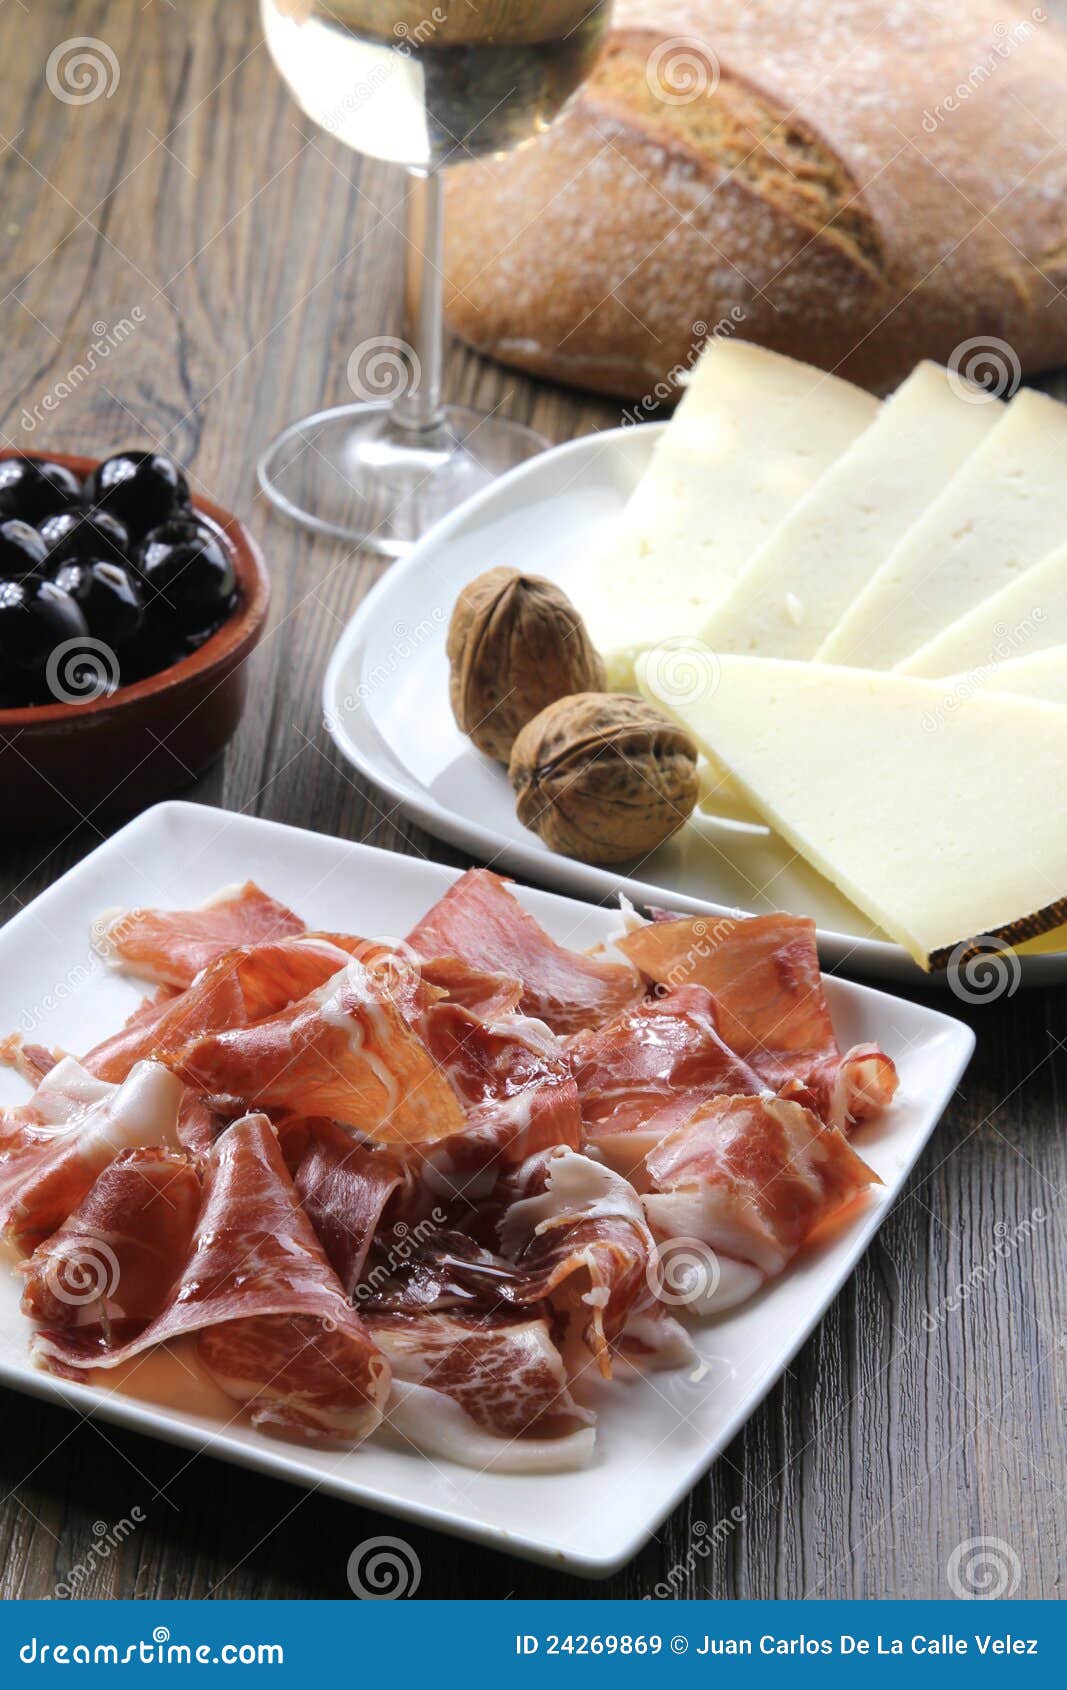 cured iberian ham and cheese tapas